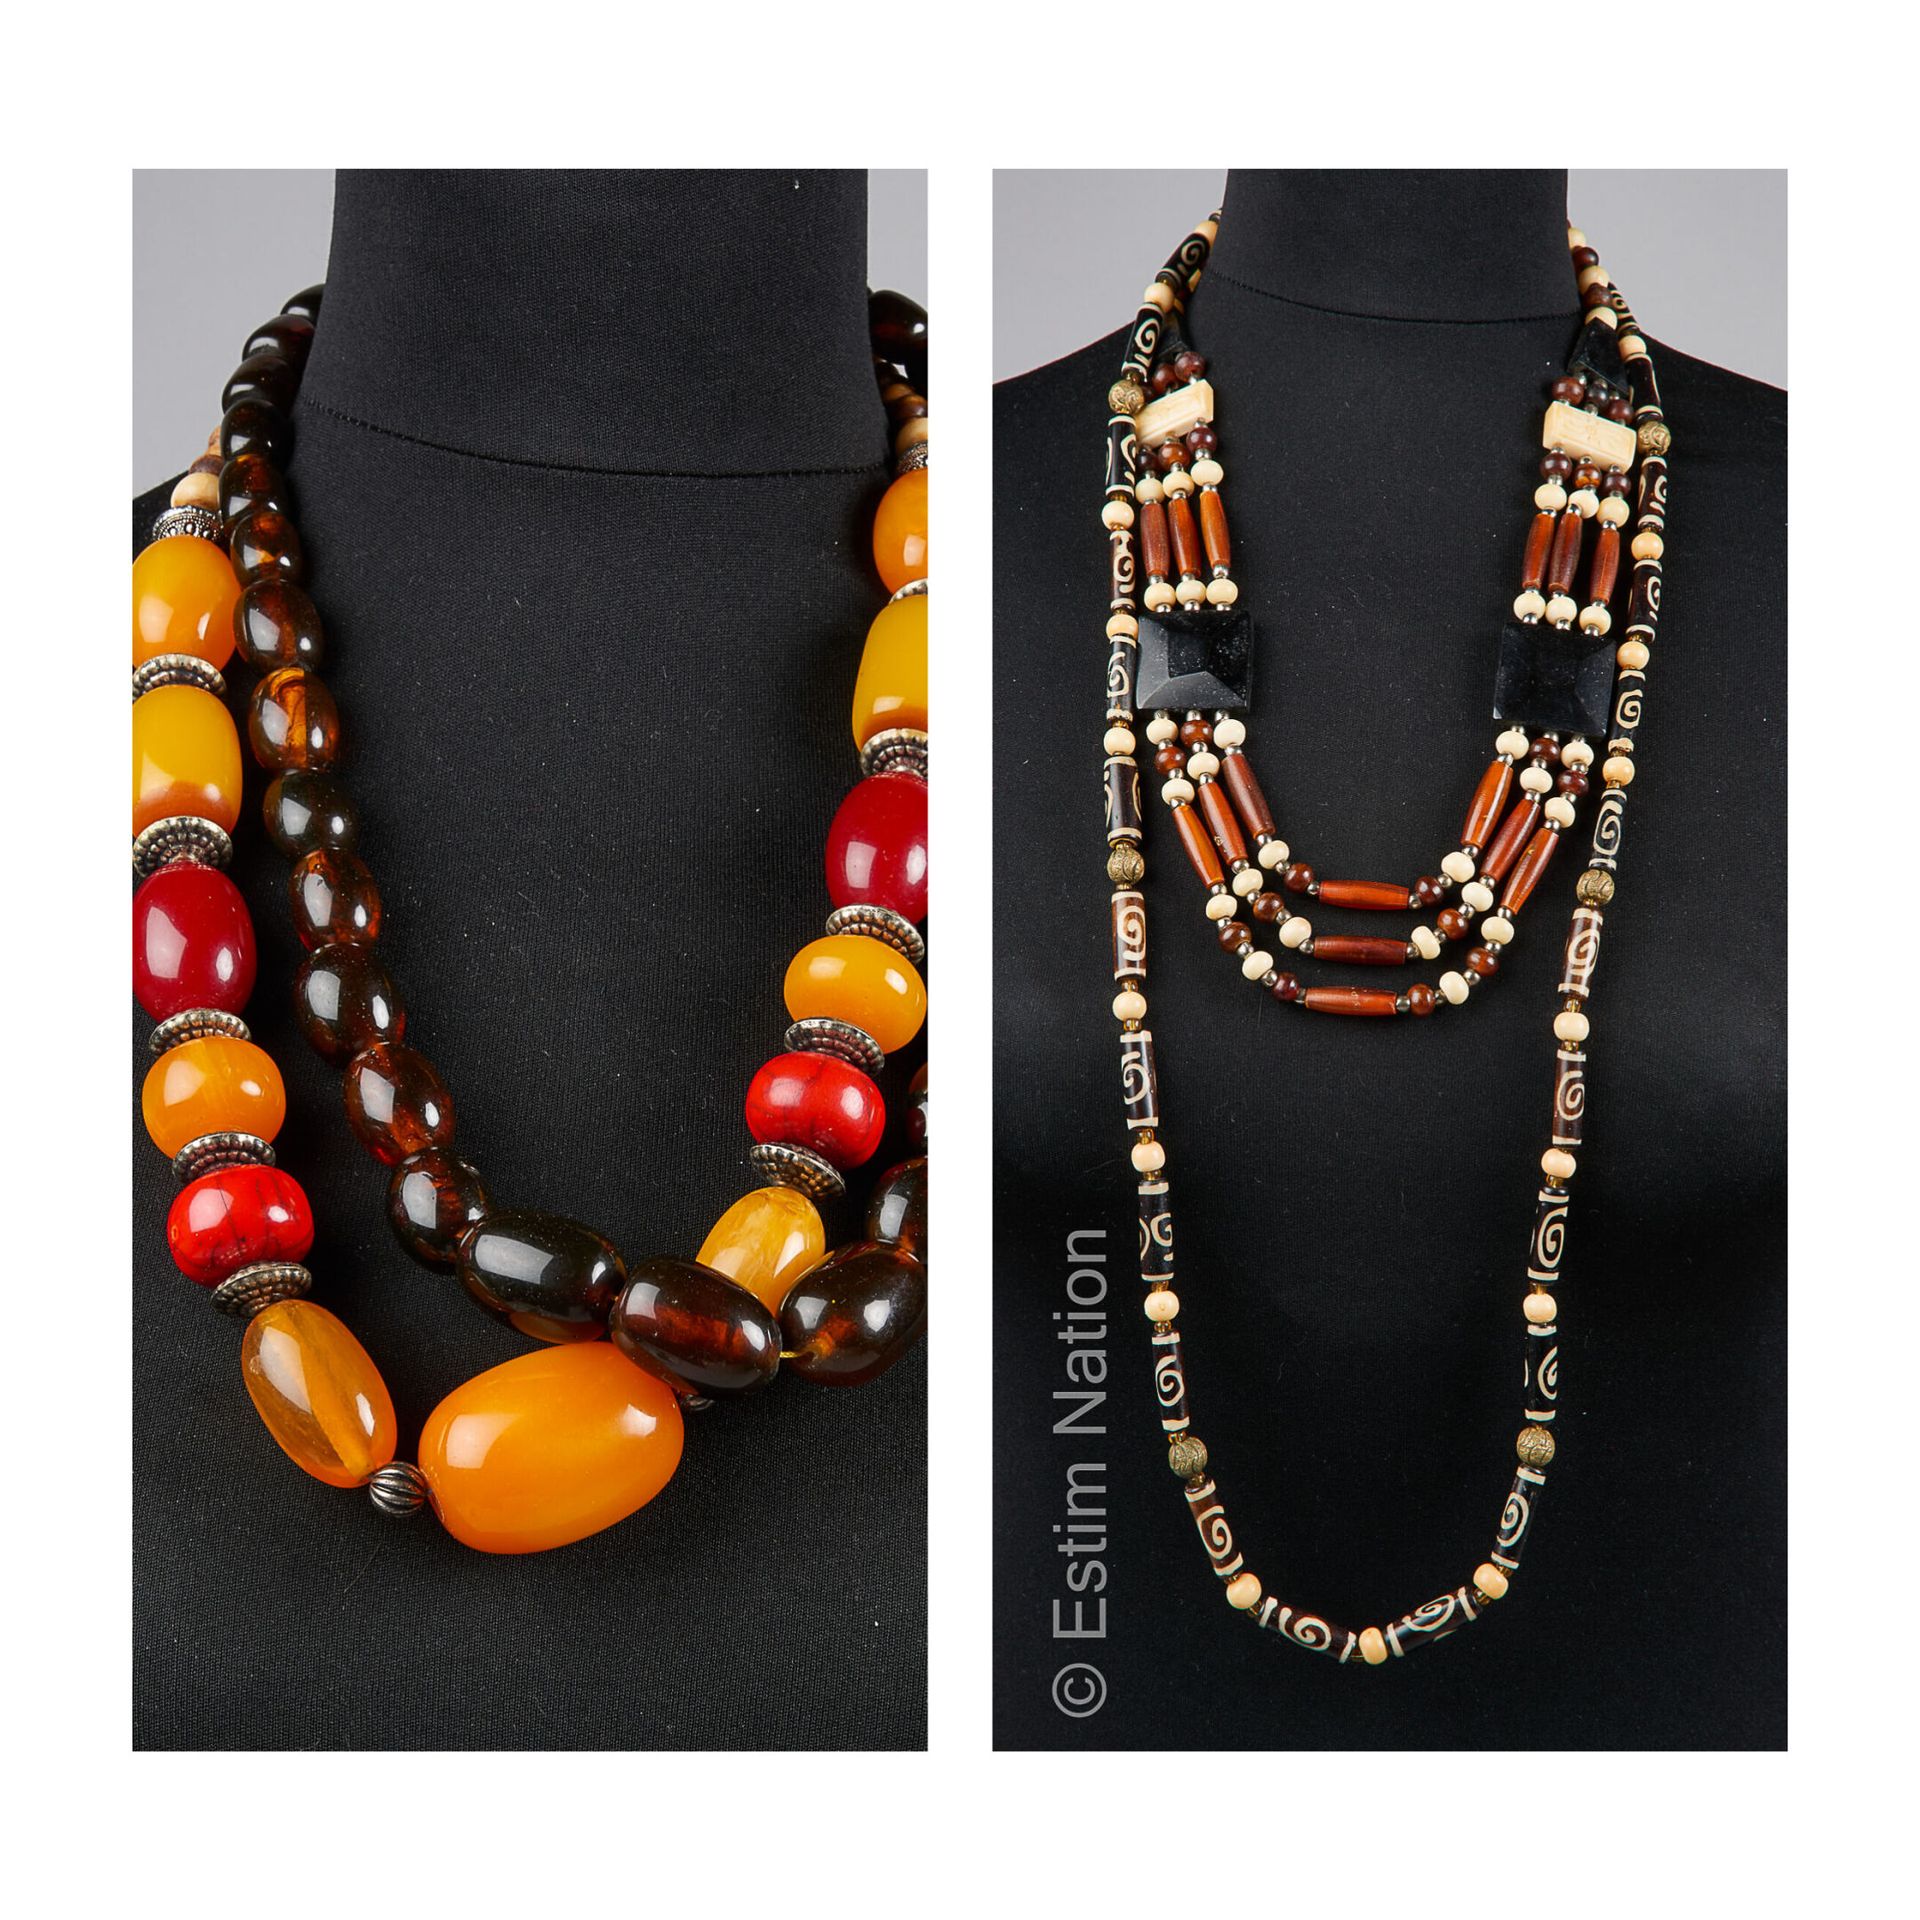 ANONYME FOUR NECKLACES of African inspiration in pearl, various bakelite (withou&hellip;